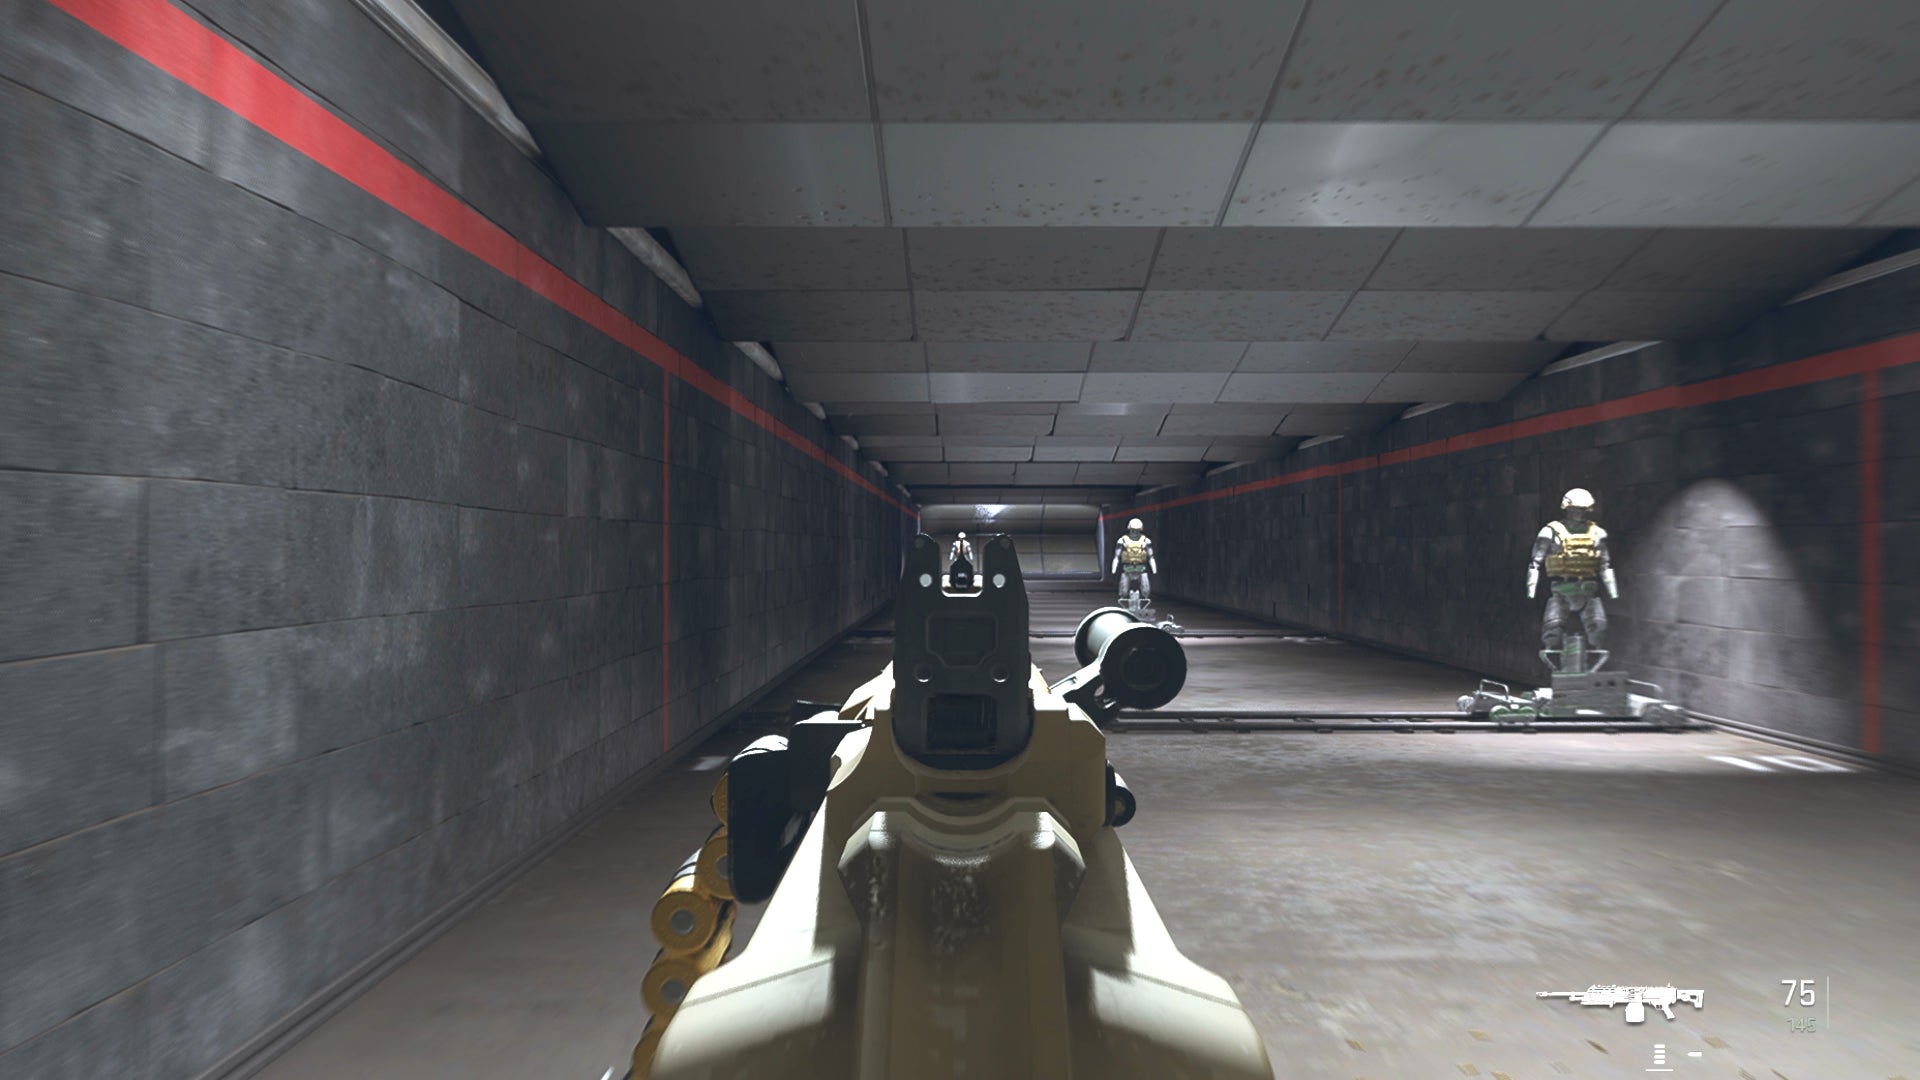 The player in Warzone 2.0 aims at a training dummy with the Raal MG ironsights.